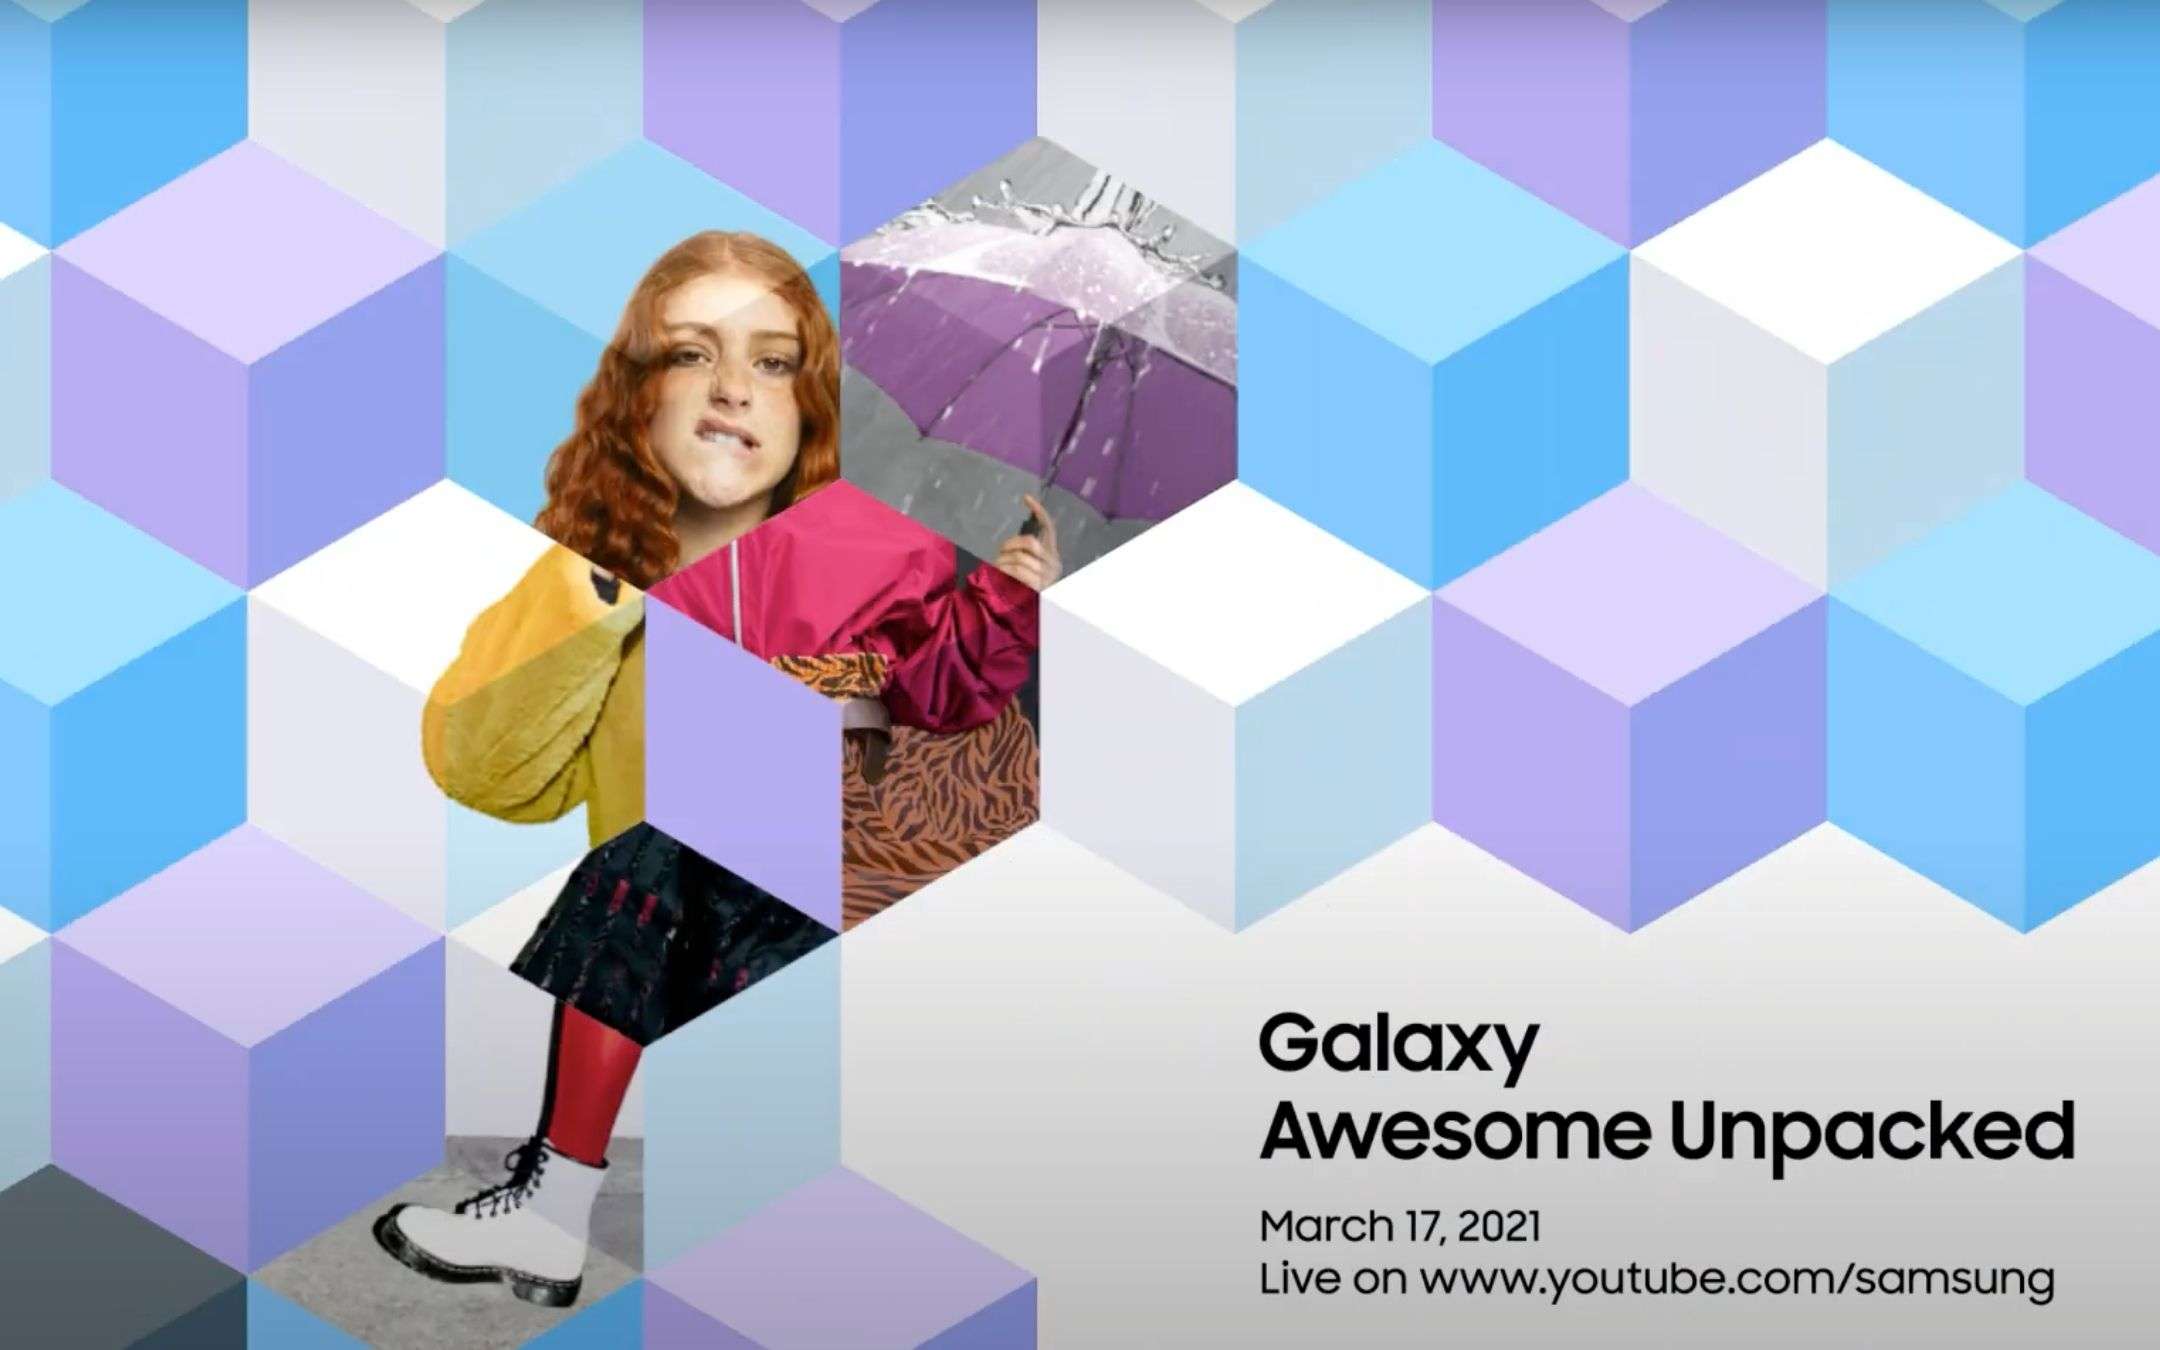 Samsung: UFFICIALE l'evento Galaxy Awesome Unpacked